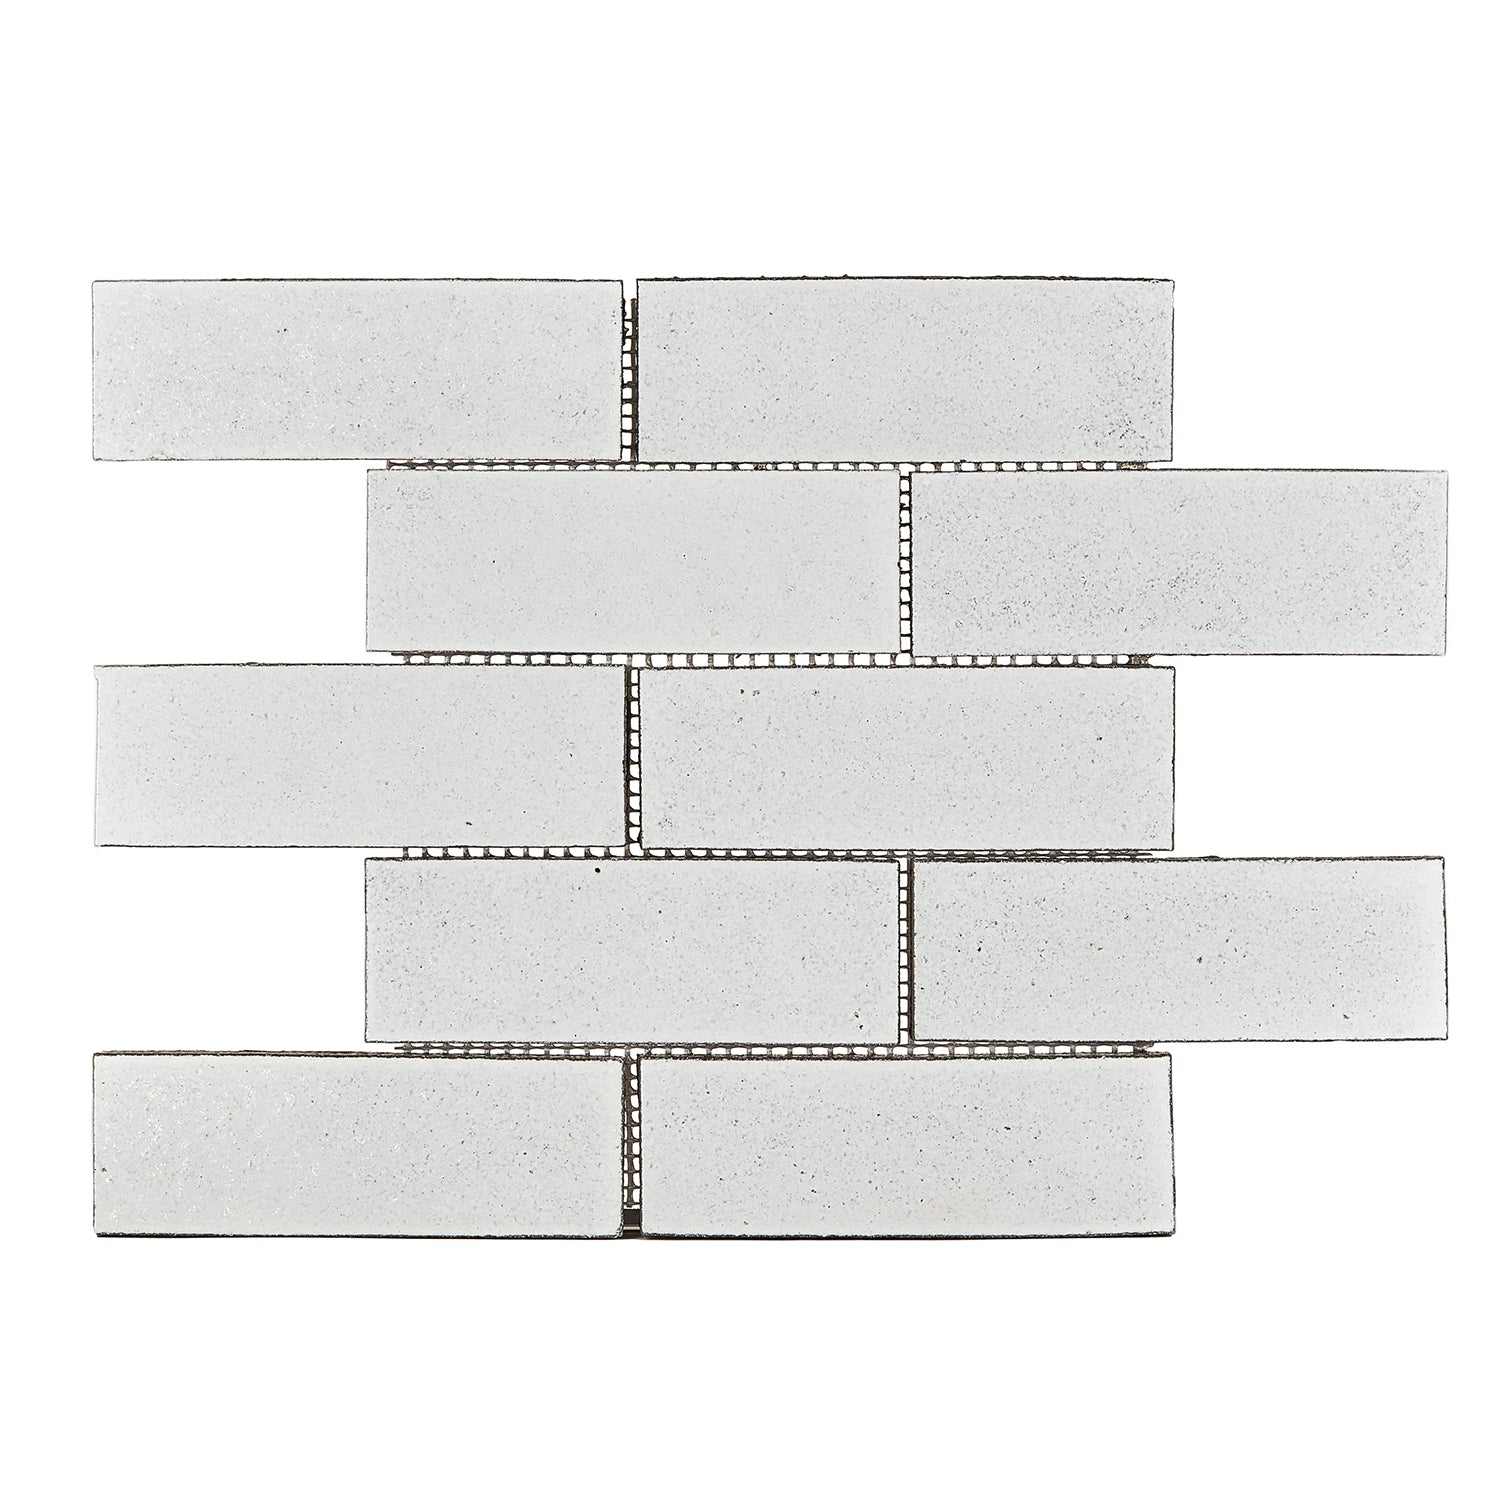 Lorca Subway Lava Stone Mosaic Floor and Wall Tile in White